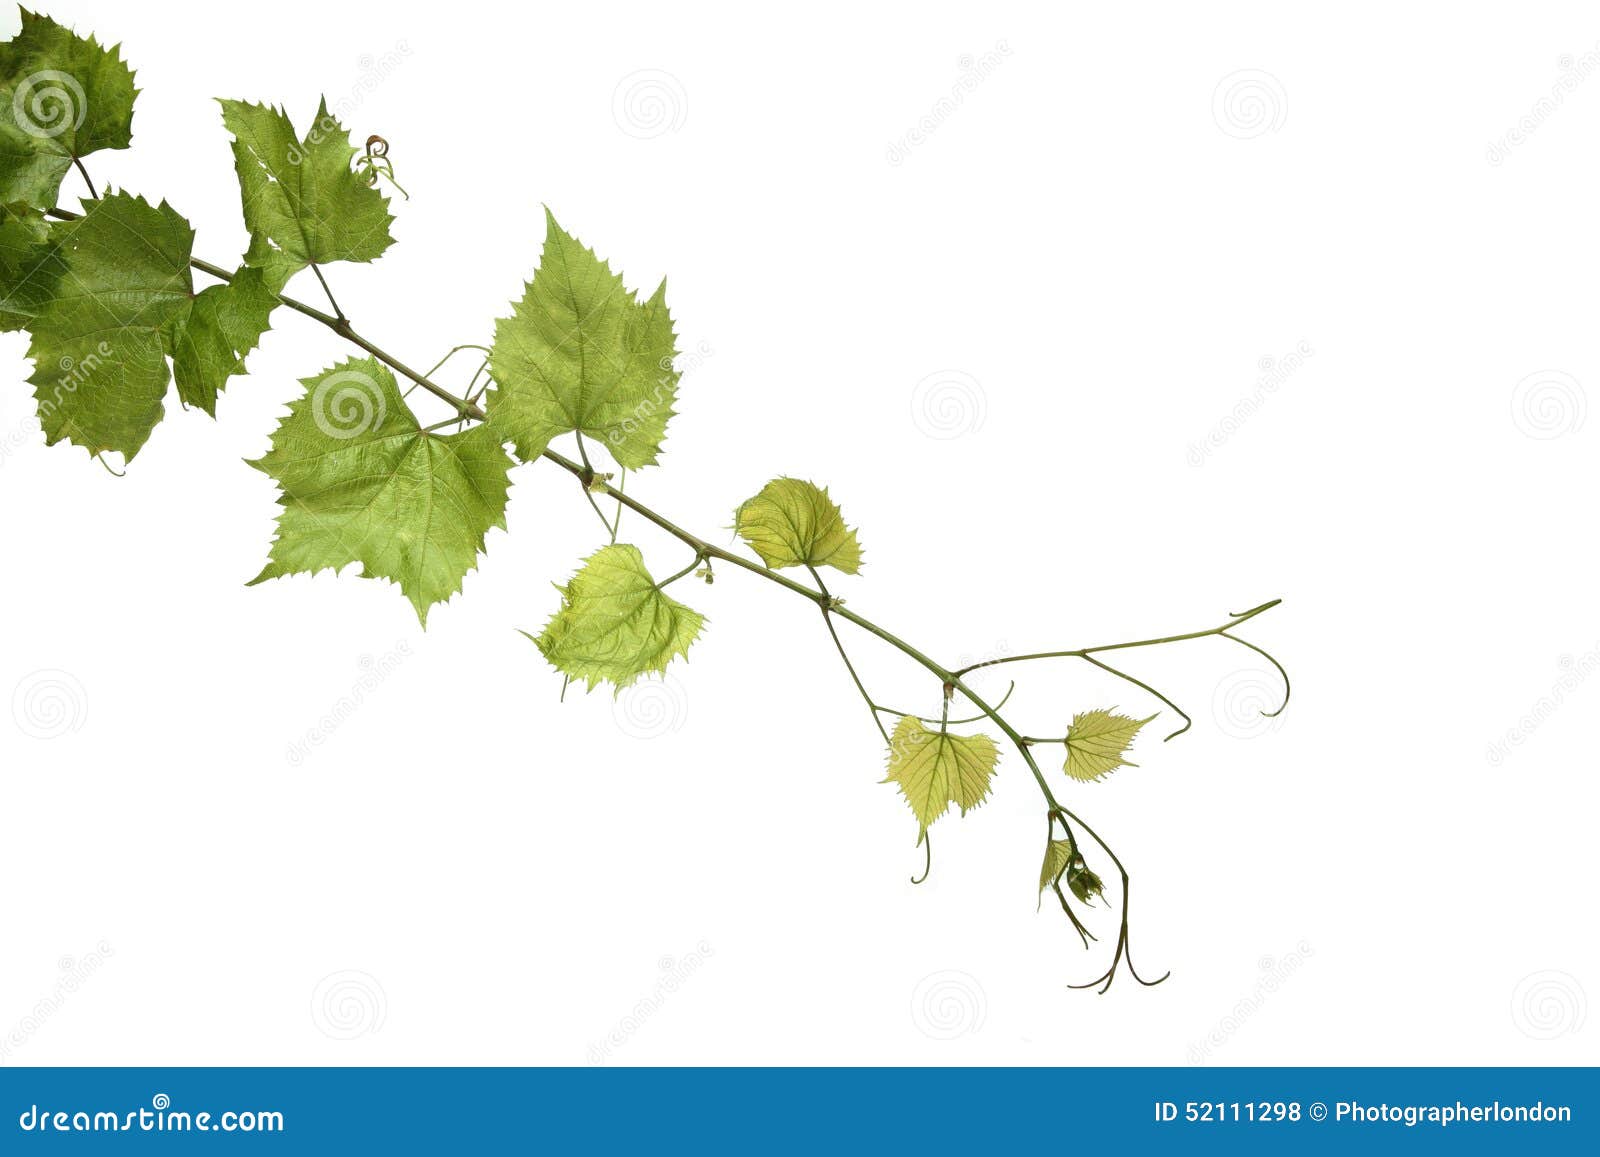 grapes leafs on white background